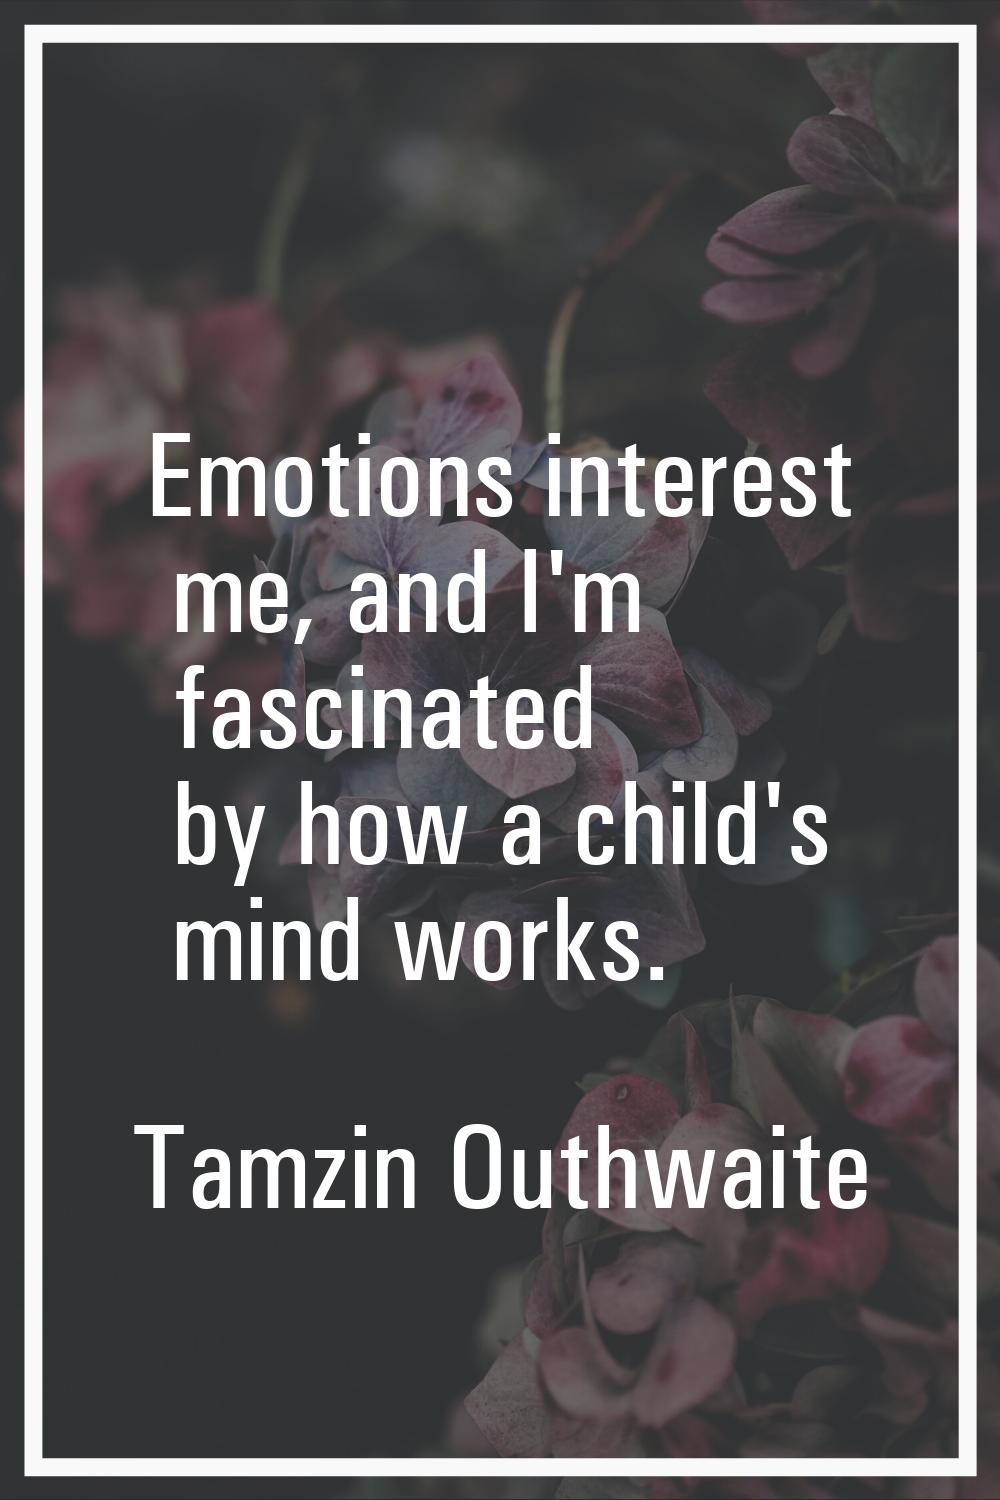 Emotions interest me, and I'm fascinated by how a child's mind works.